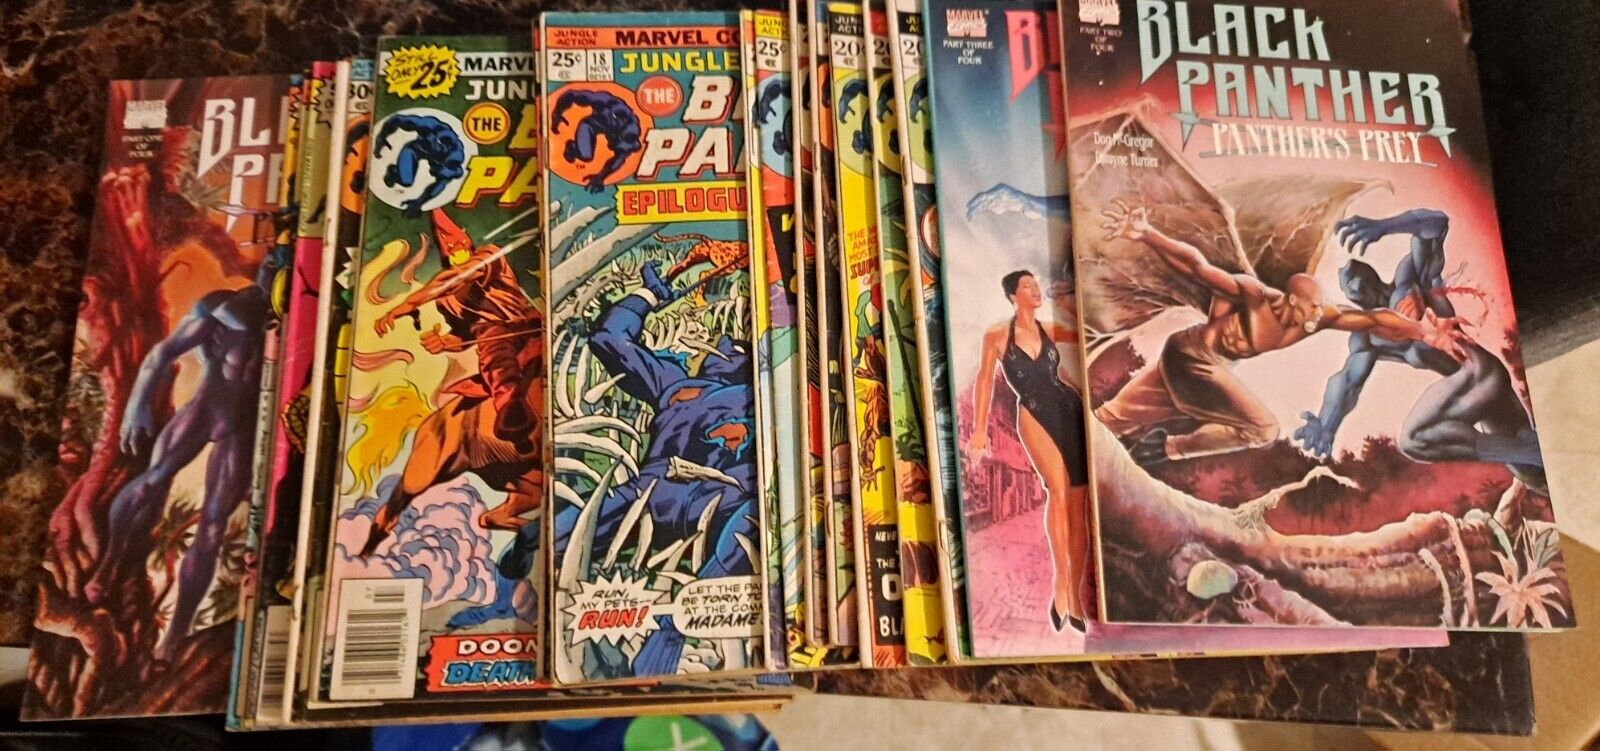 THE BLACK PANTHER LOT OF COMIC BOOKS. PRICED TO SELL